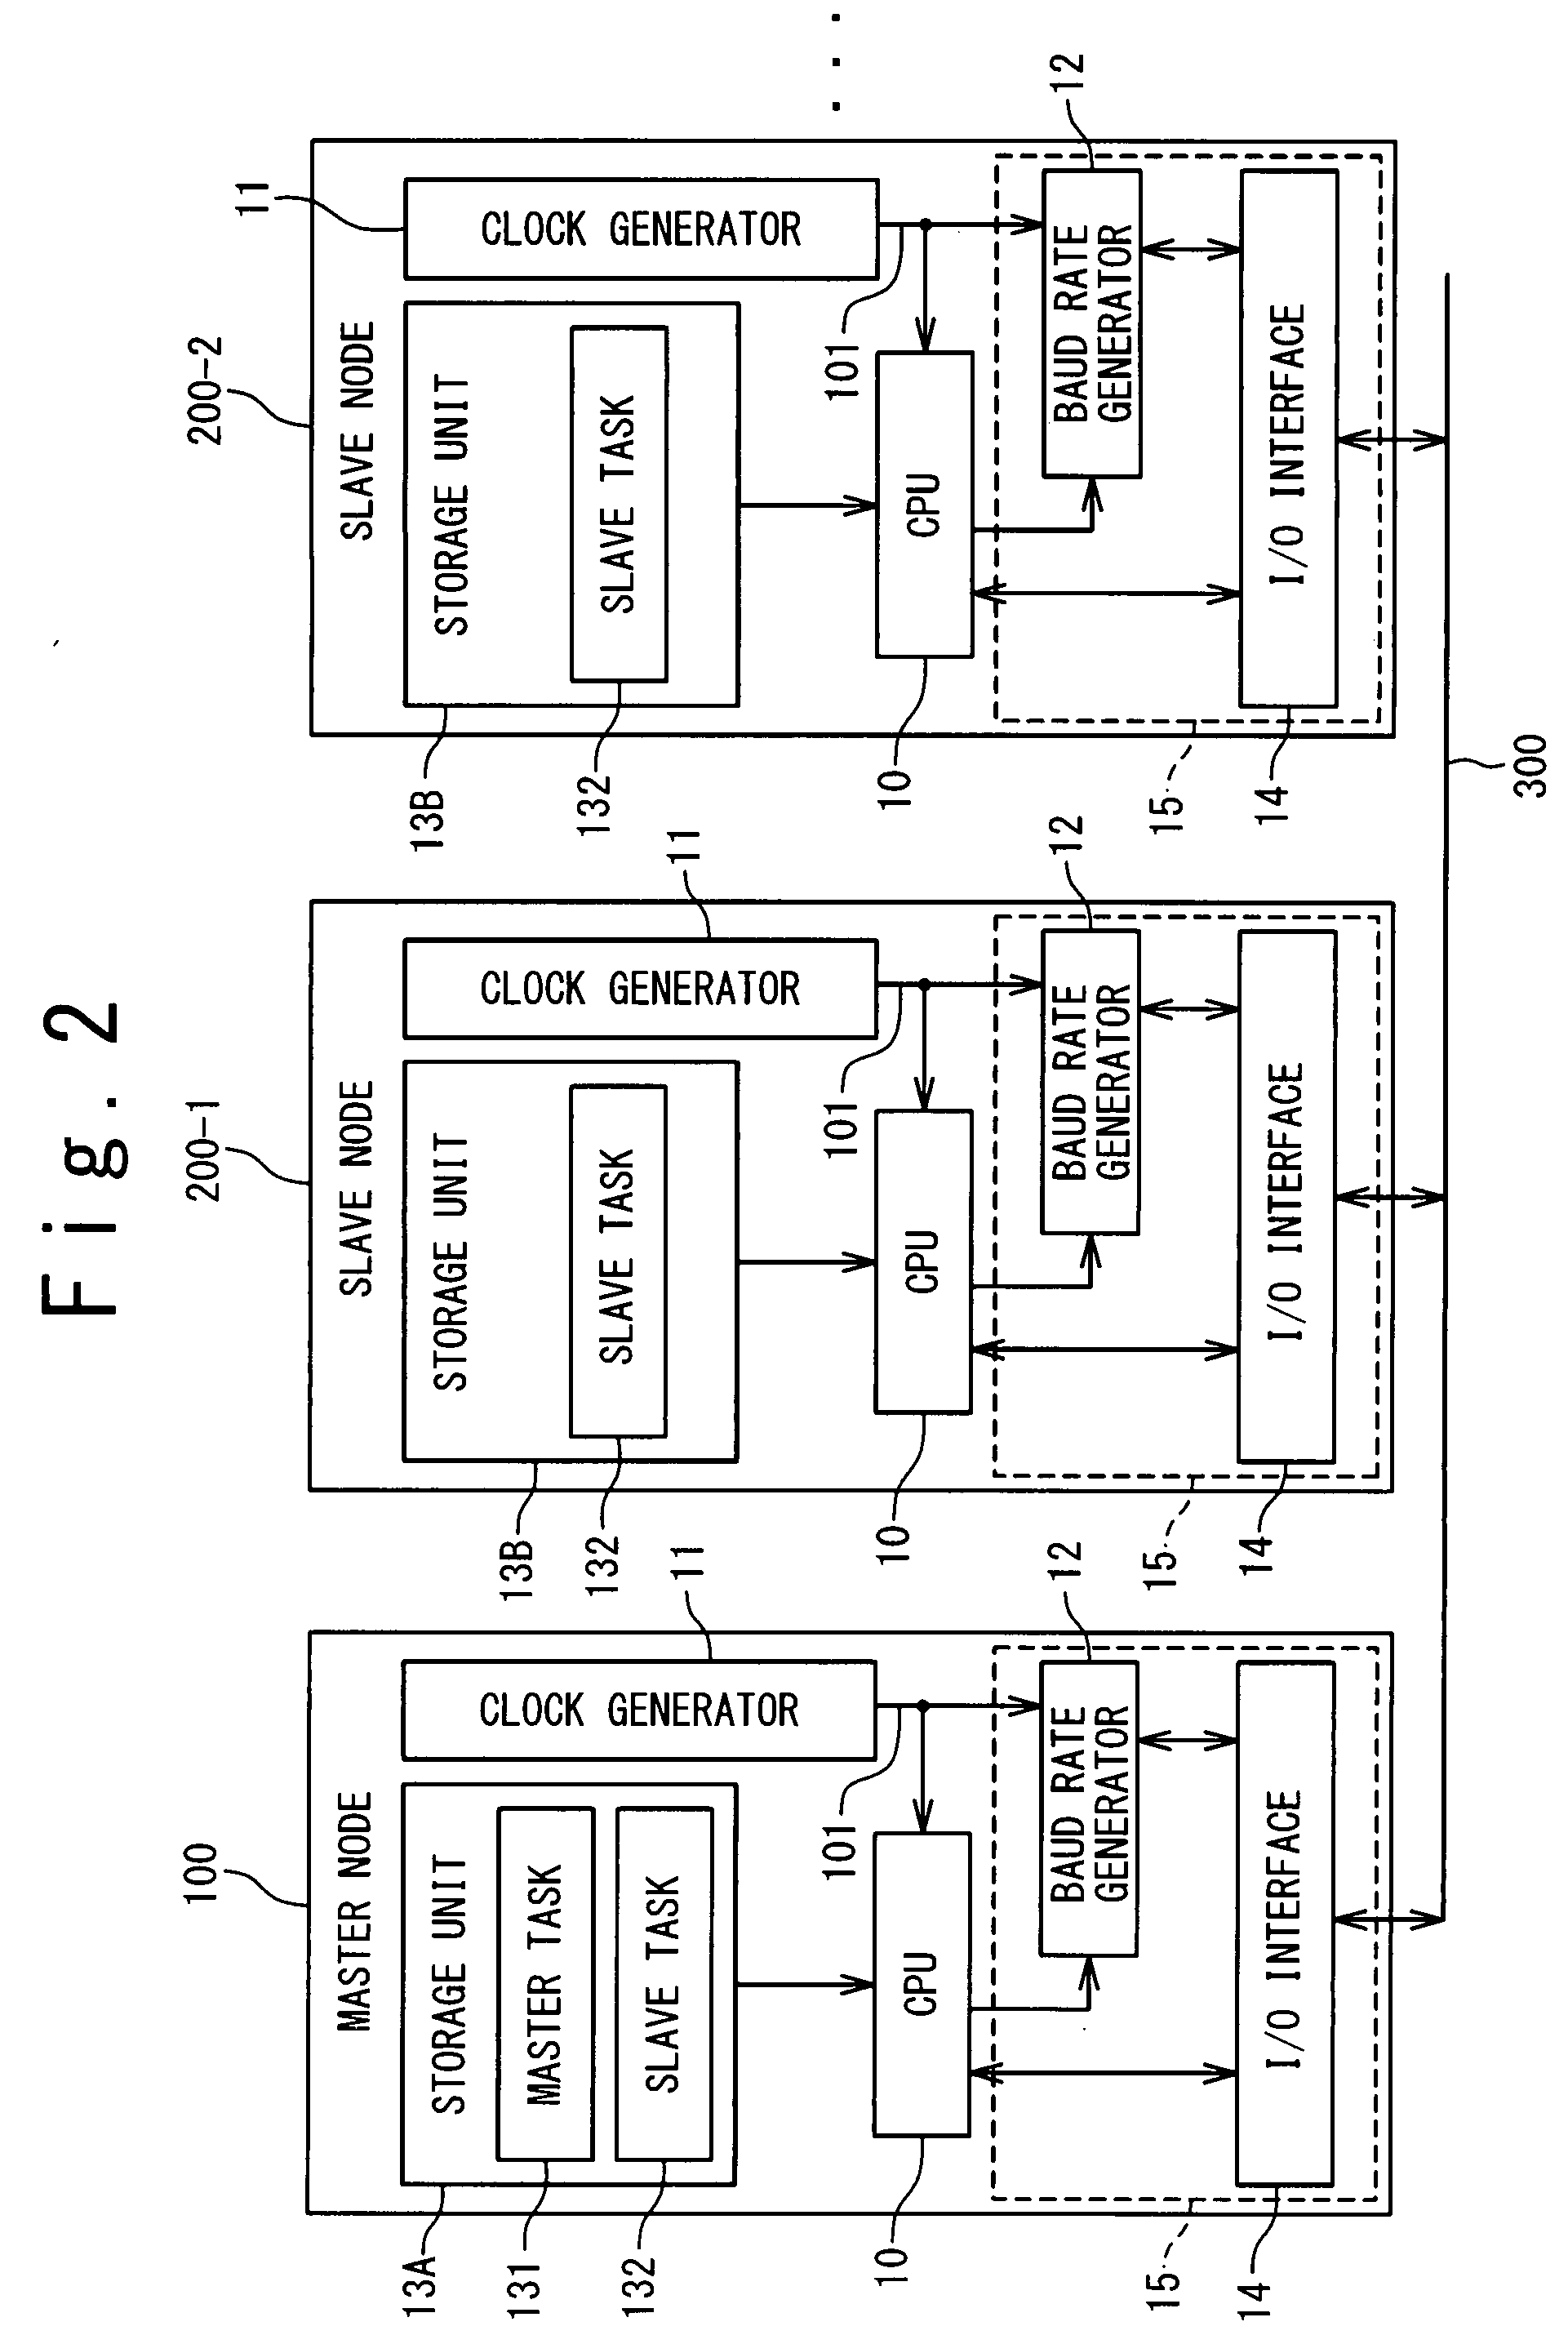 Serial communication system with baud rate generator